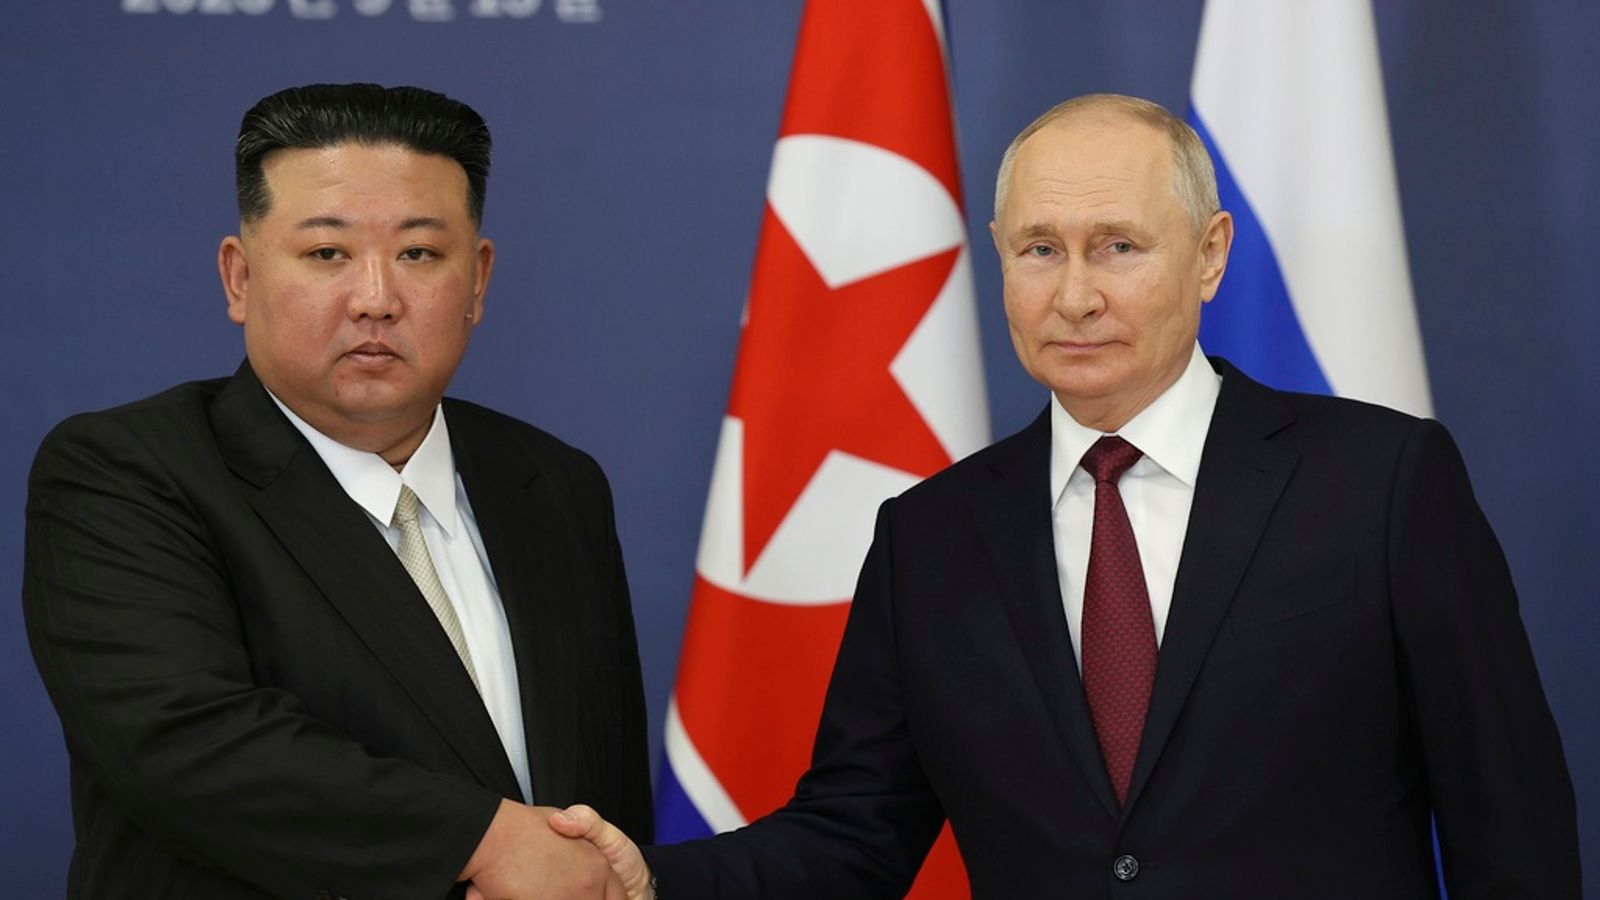 Putin's visit to North Korea is a very much a diplomatic two-fingers to the West